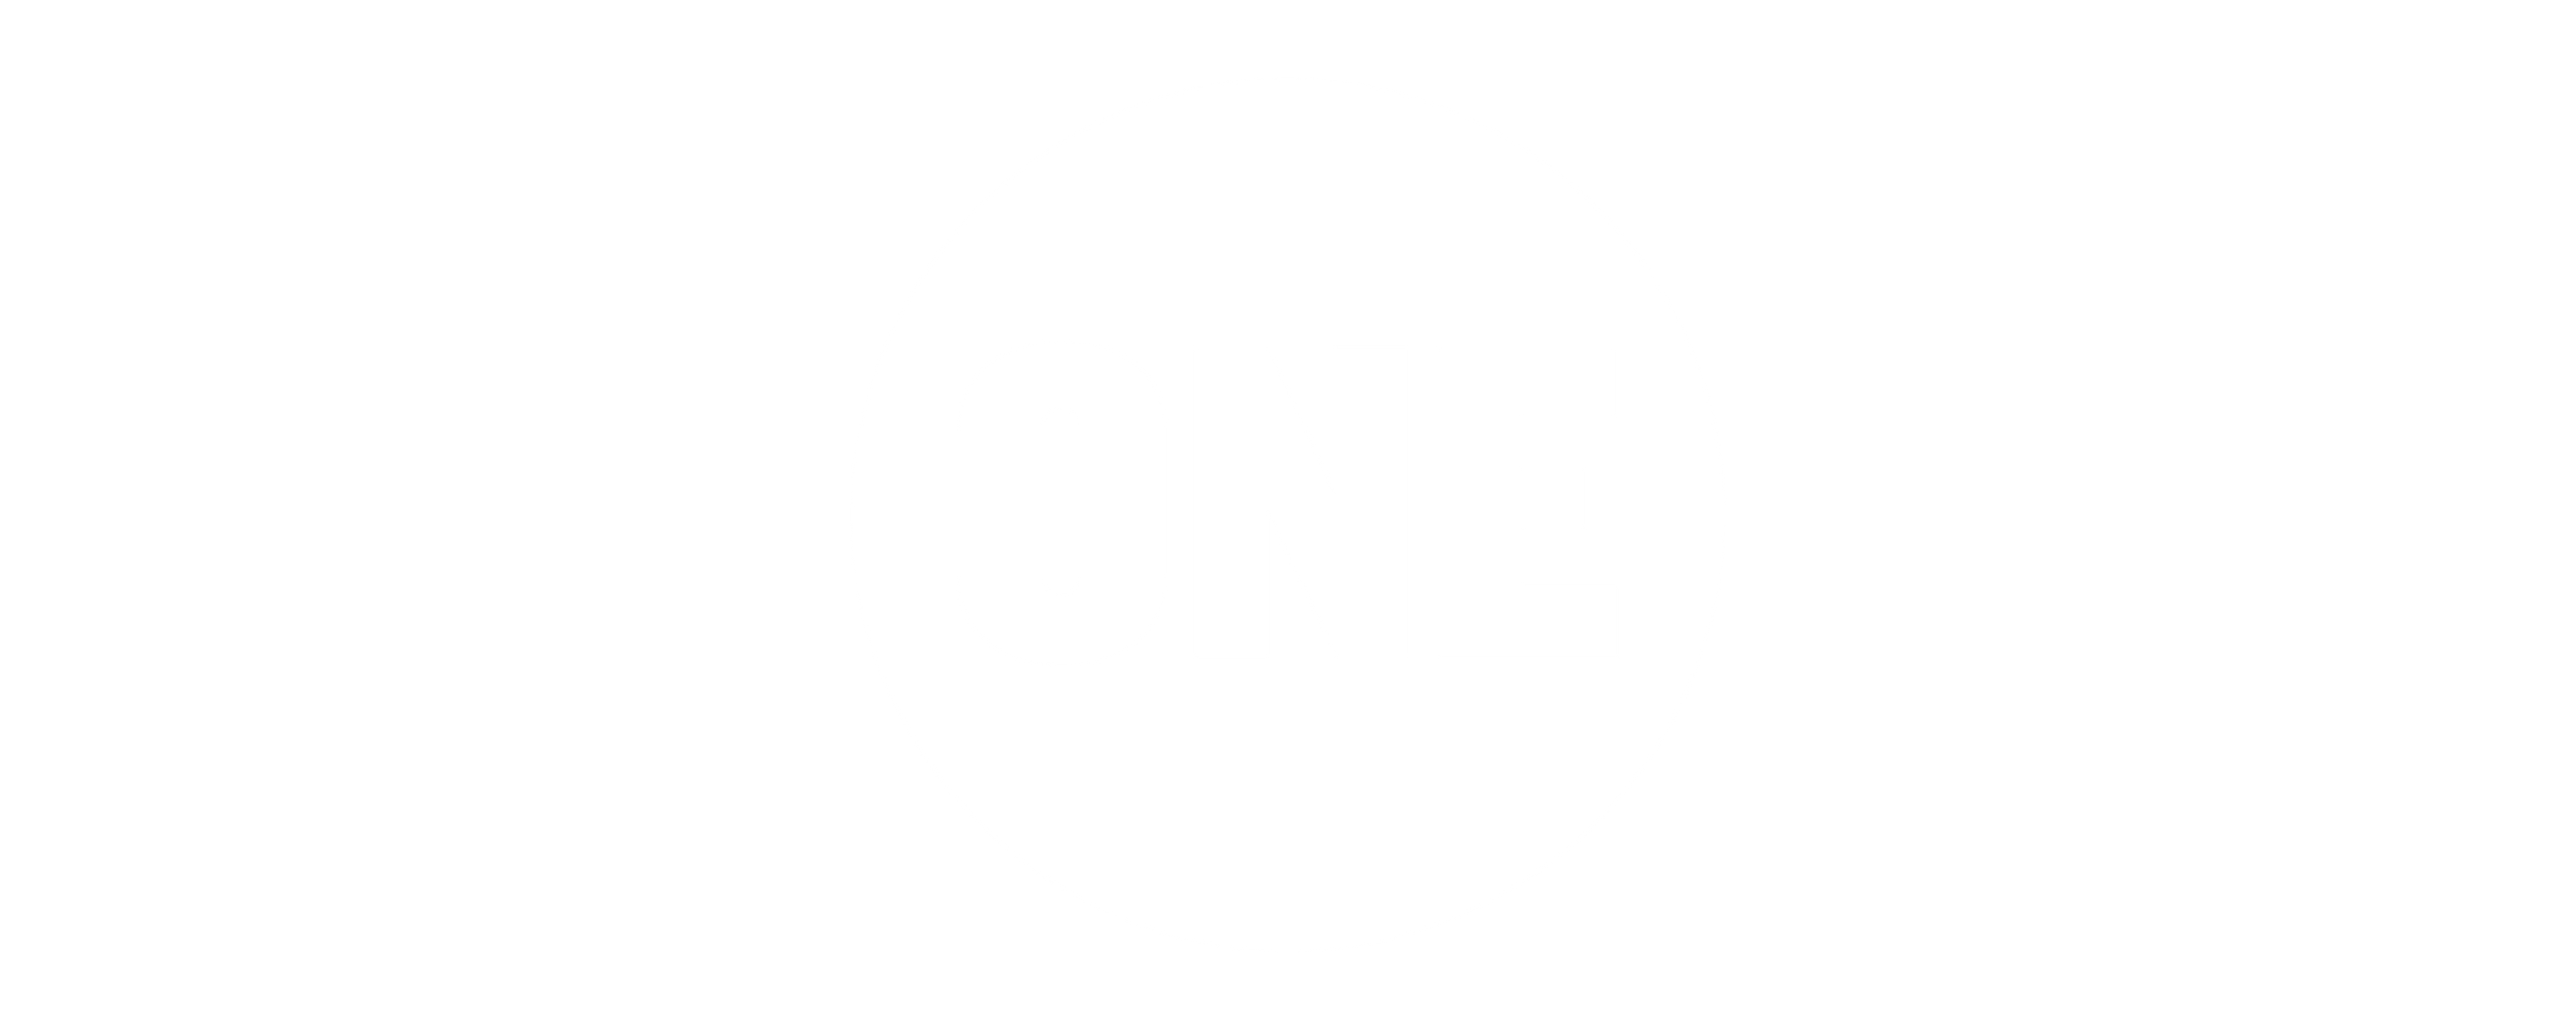 The One logo in white, on a transparent background.